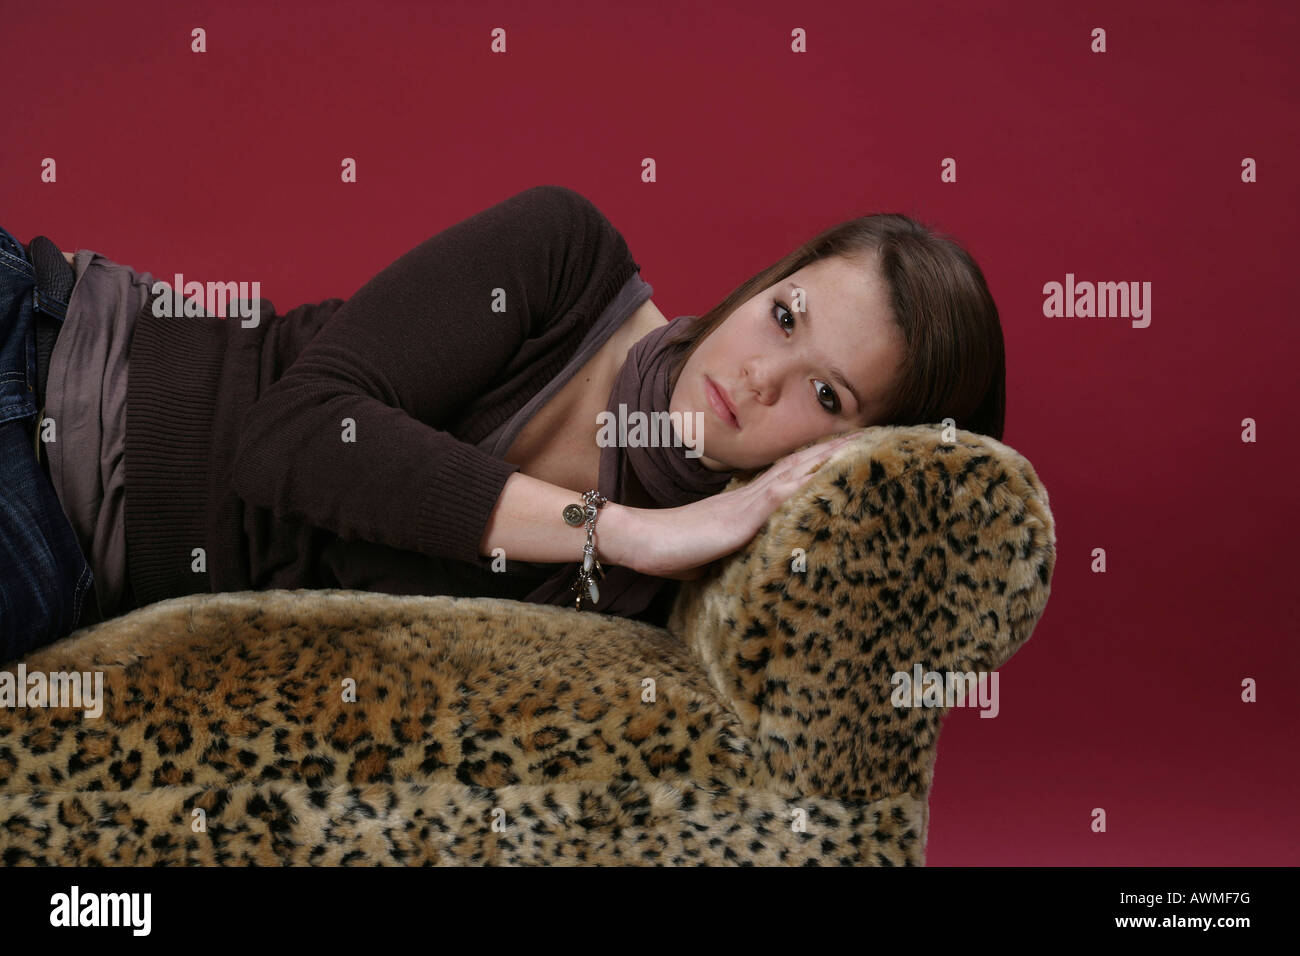 Portrait of a girl, pre-teen, early teens laying on a tiger-print sofa Stock Photo